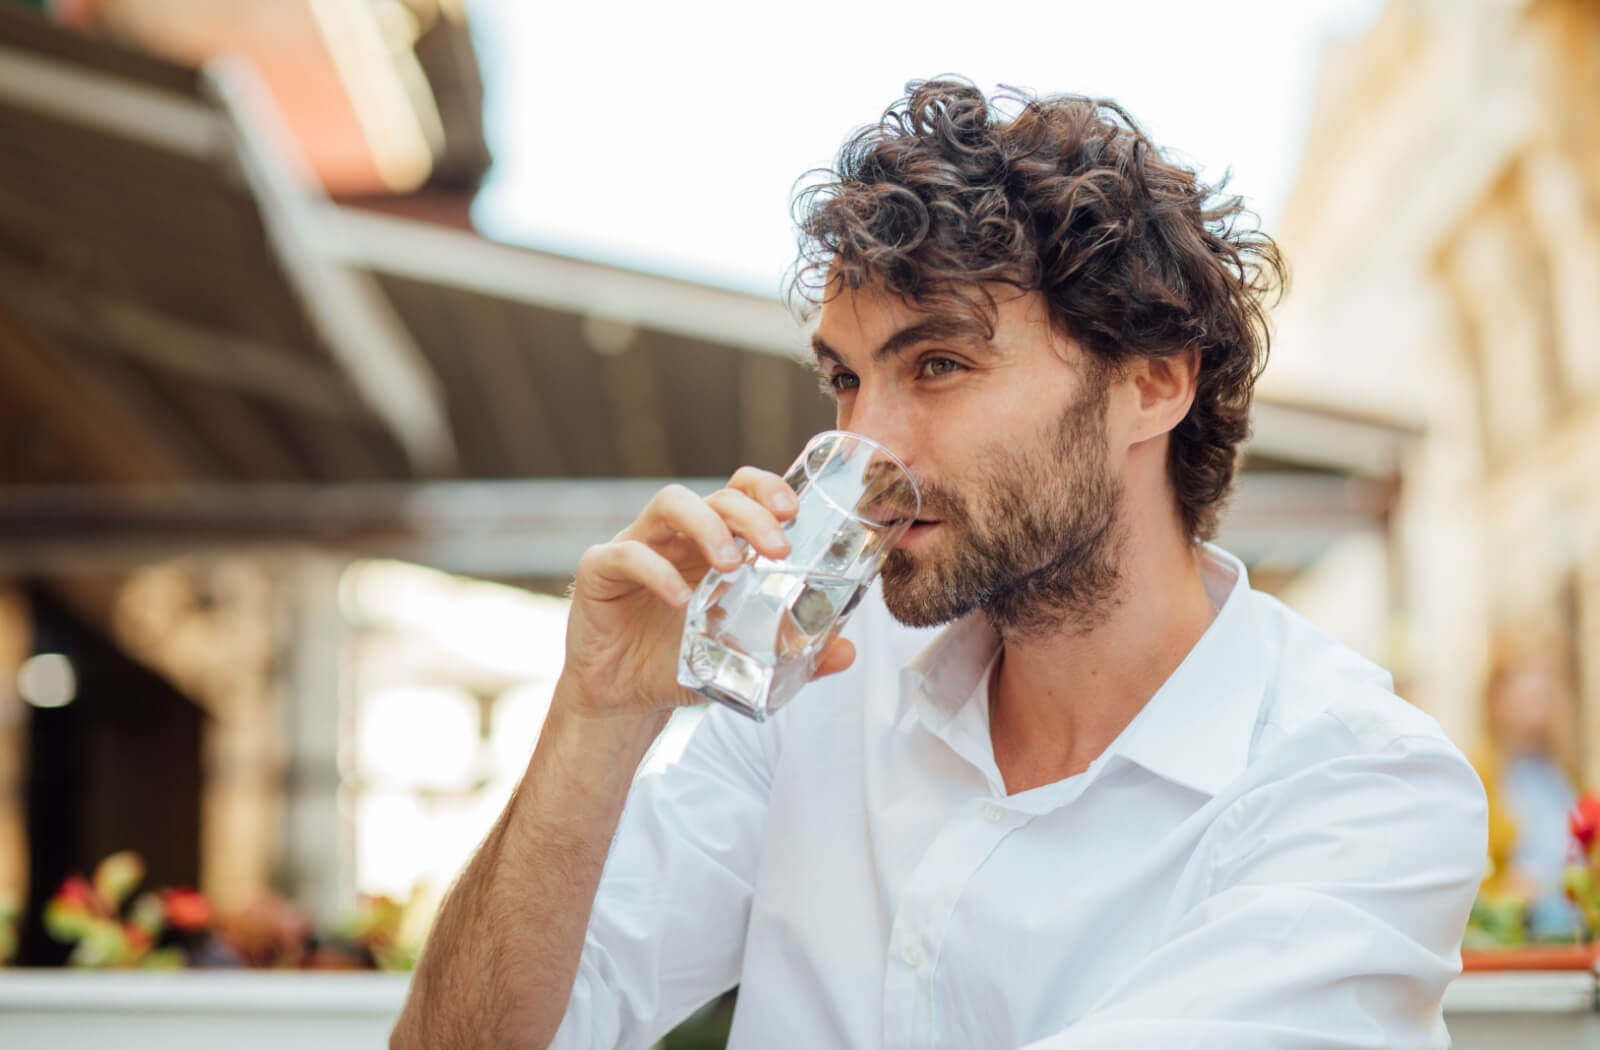 A man in a white shirt drinking a glass of water outdoors.